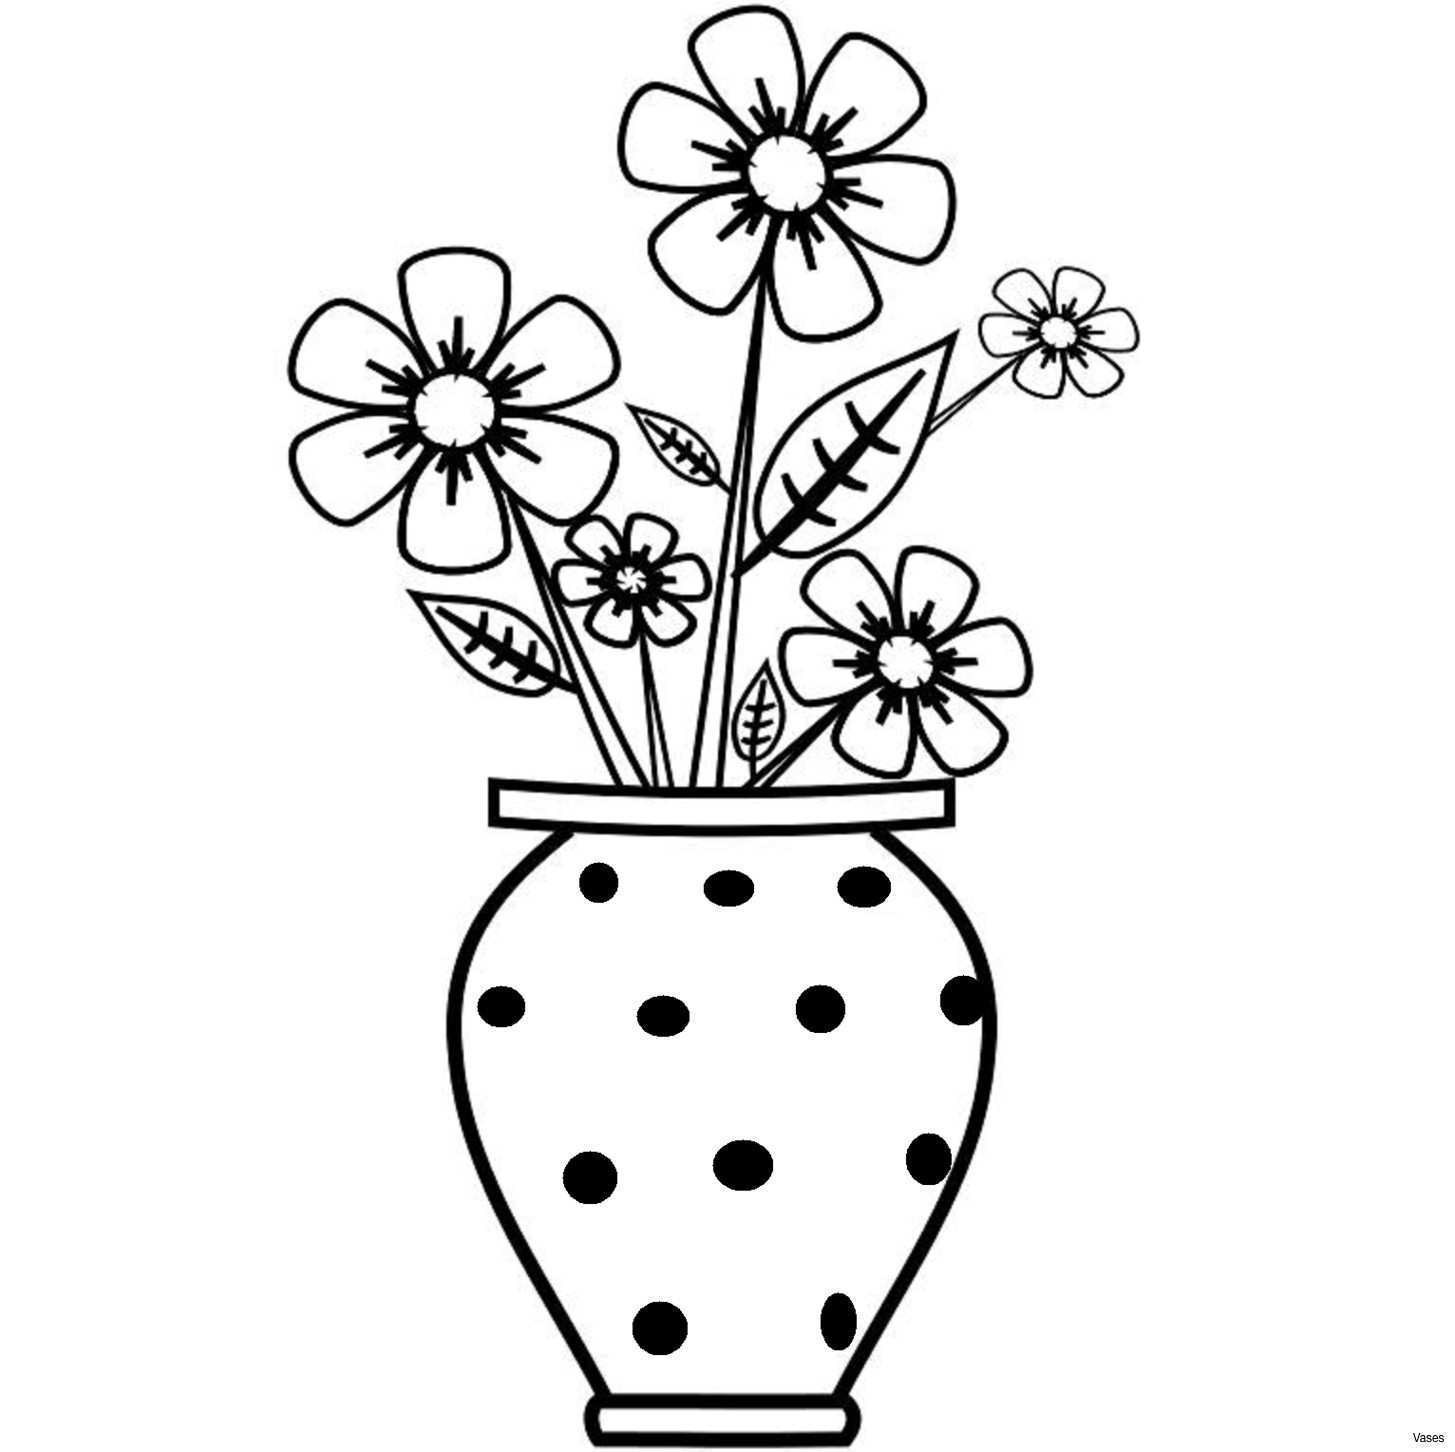 22 Wonderful Flower Vase Painting 2024 free download flower vase painting of black and white art inspirational will clipart colored flower vase with regard to black and white art inspirational will clipart colored flower vase clip arth vases a